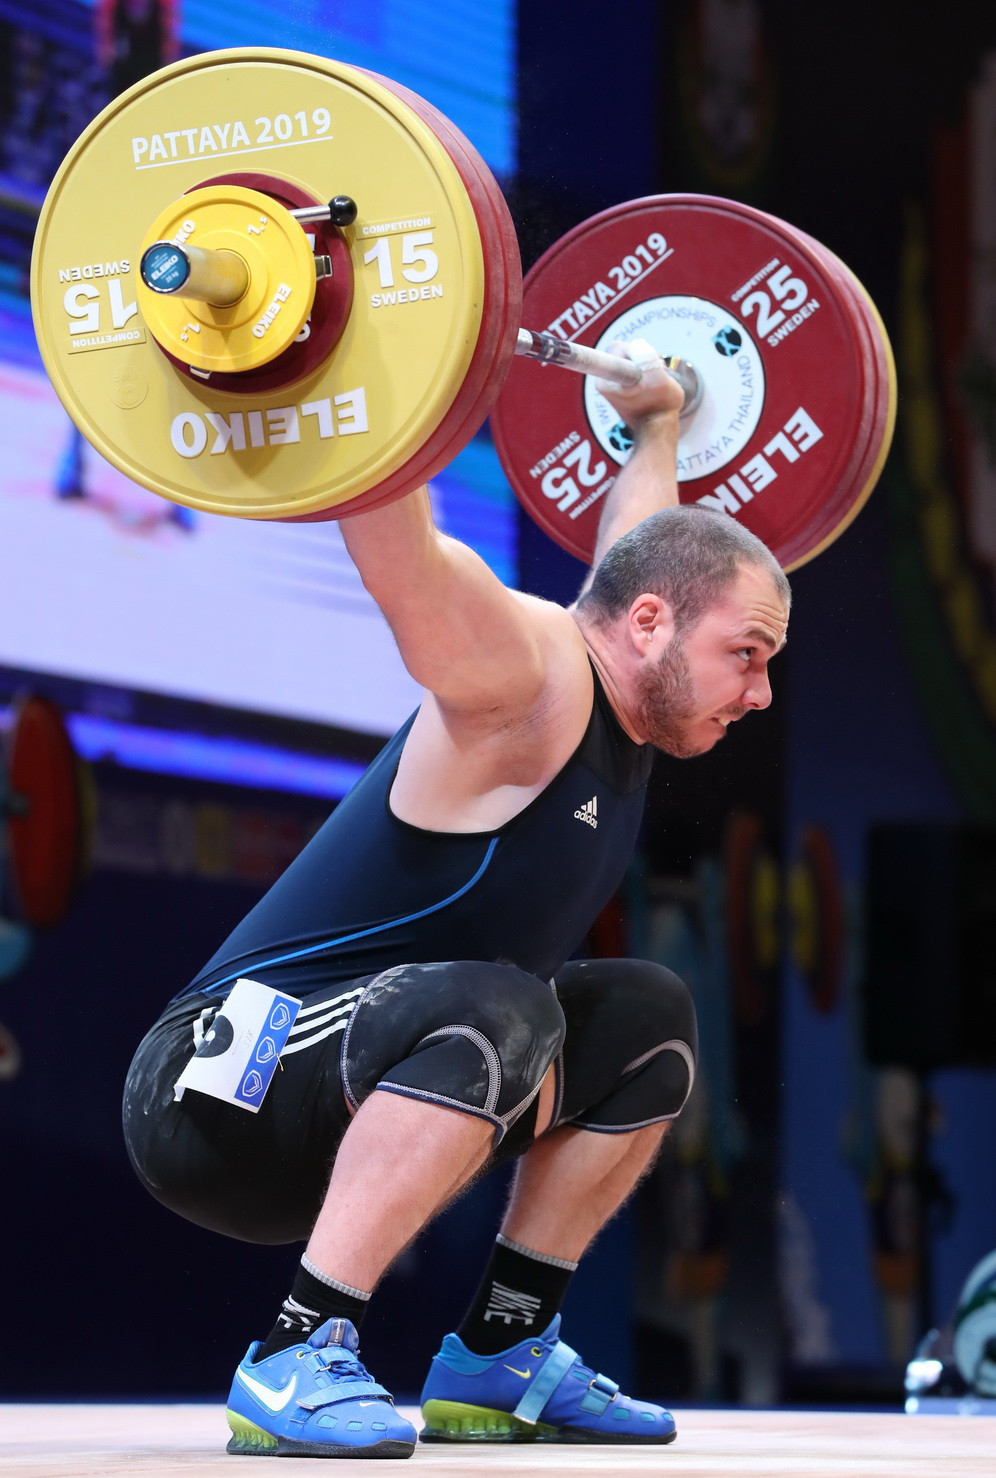 Armenia’s Hakob Mkrtchyan triumphed overall in a highly-competitive men's 89kg event ©IWF